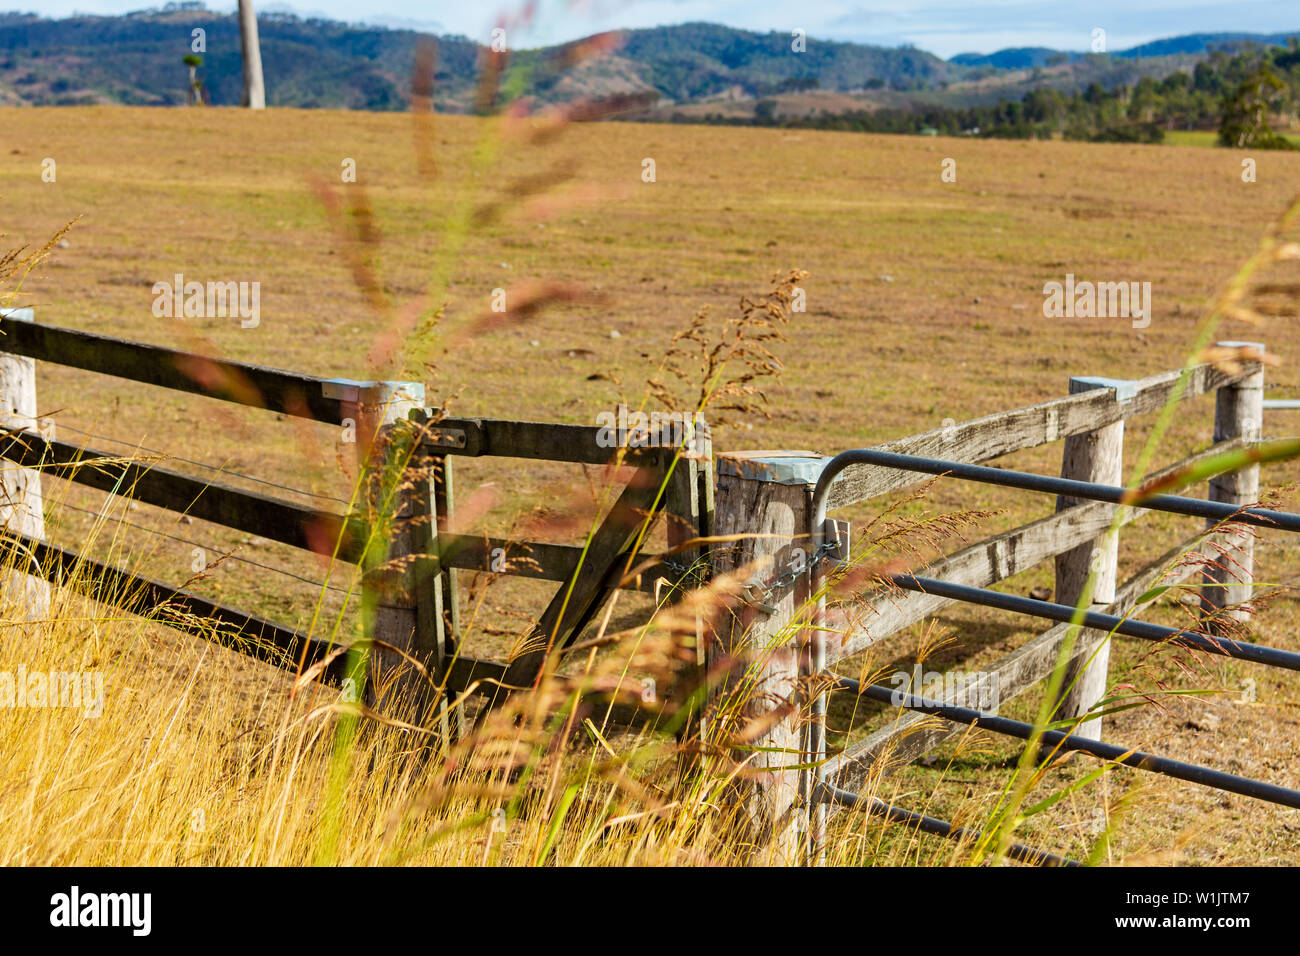 The Rural Australian Landscape with a gate and fencing in the foreground. Stock Photo